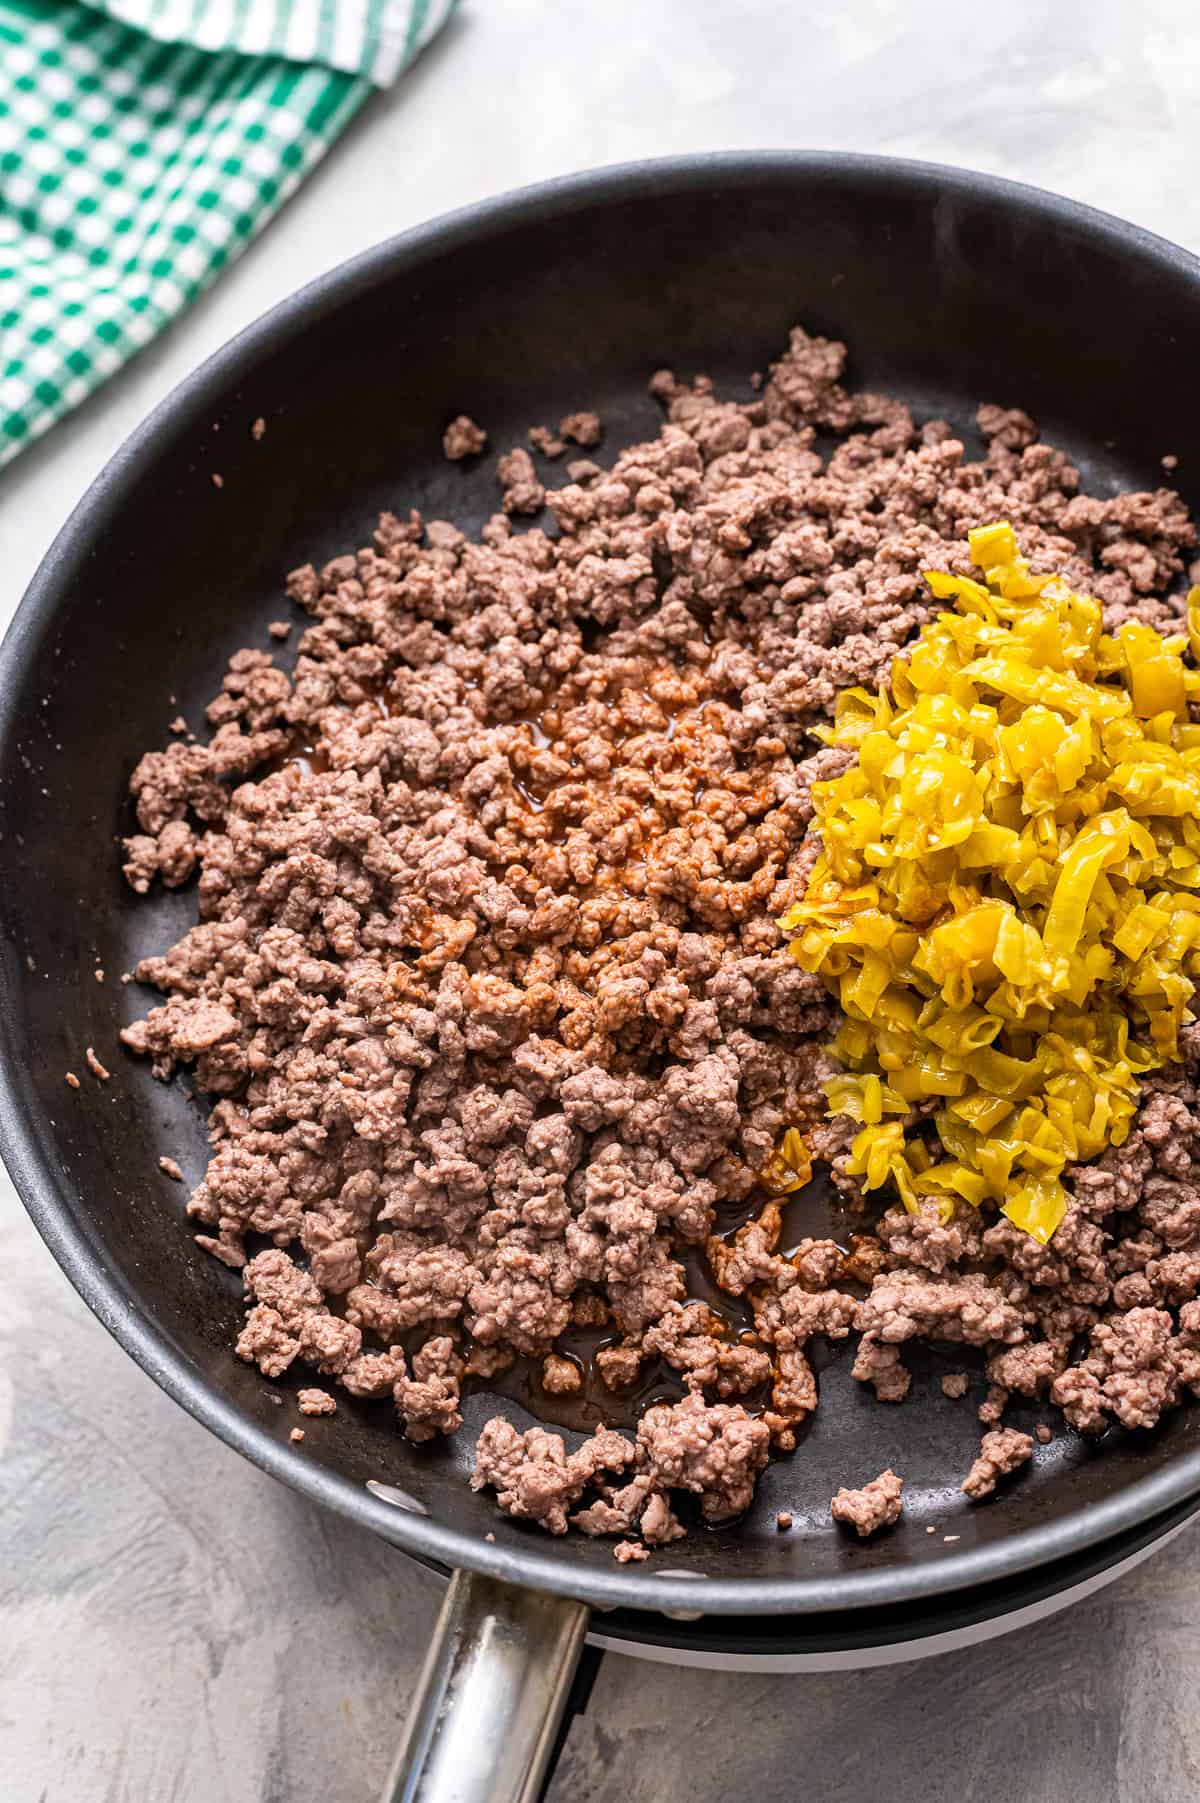 Skillet with ground beef and seasonings in it